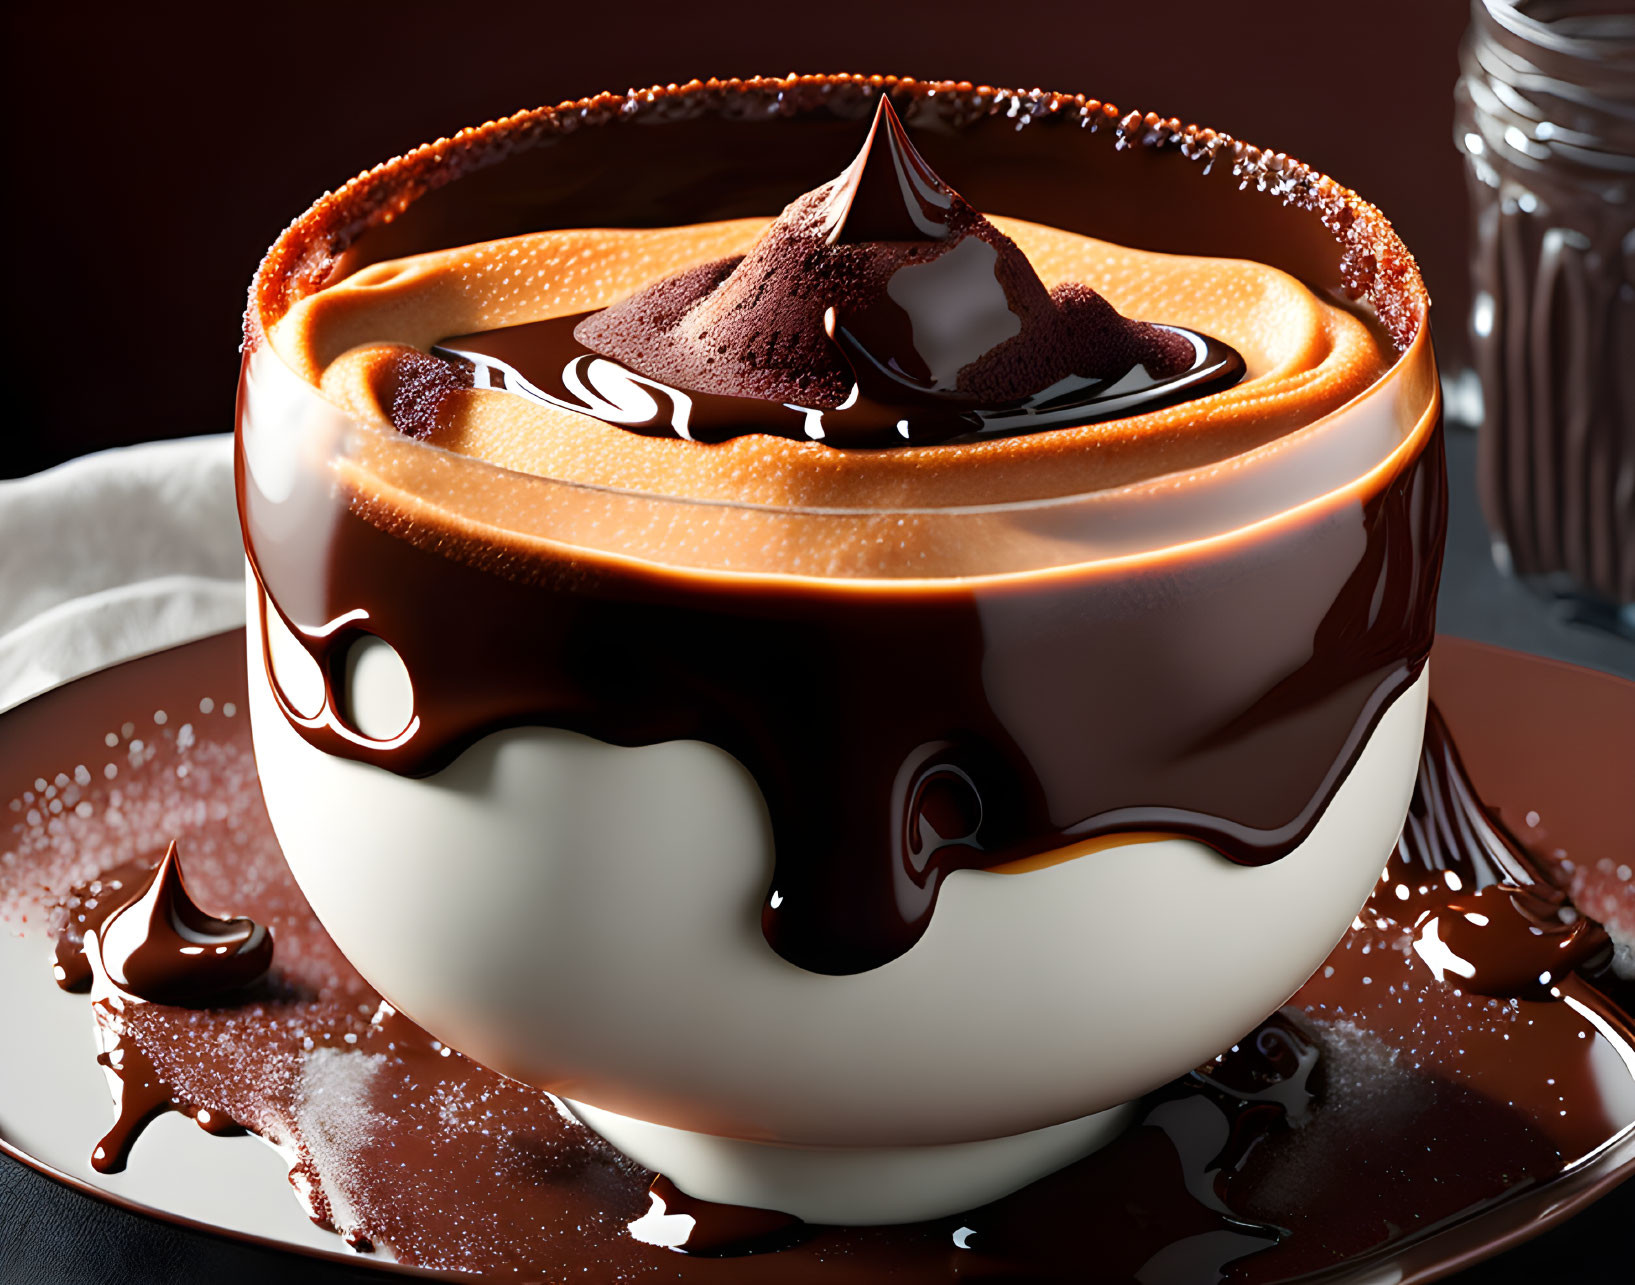 Chocolate and Caramel Layered Dessert Bowl with Drizzle and Swirl